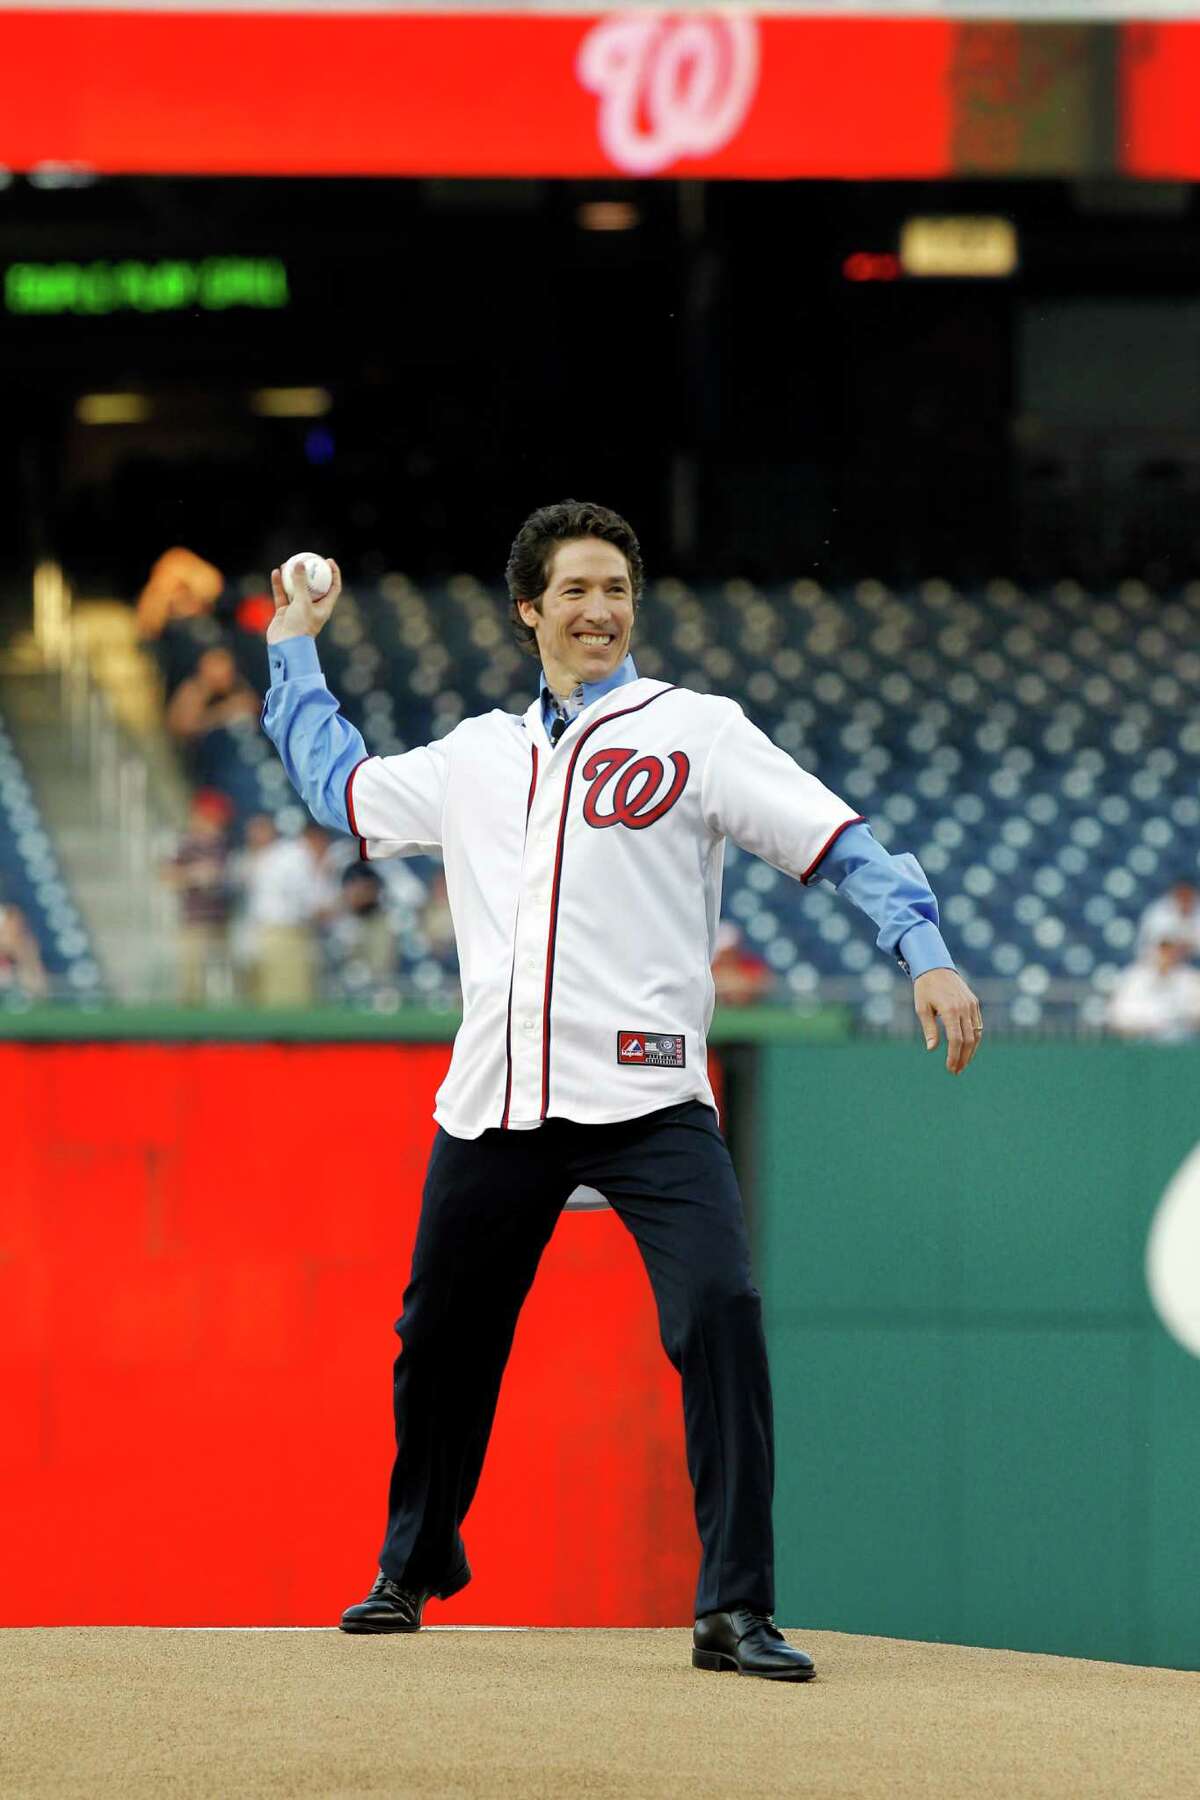 Joel Osteen throws out the ceremonial first pitch prior to a Washington Nationals baseball game against the Houston Astros in Washington, April 16, 2012. (AP Photo/Ann Heisenfelt)